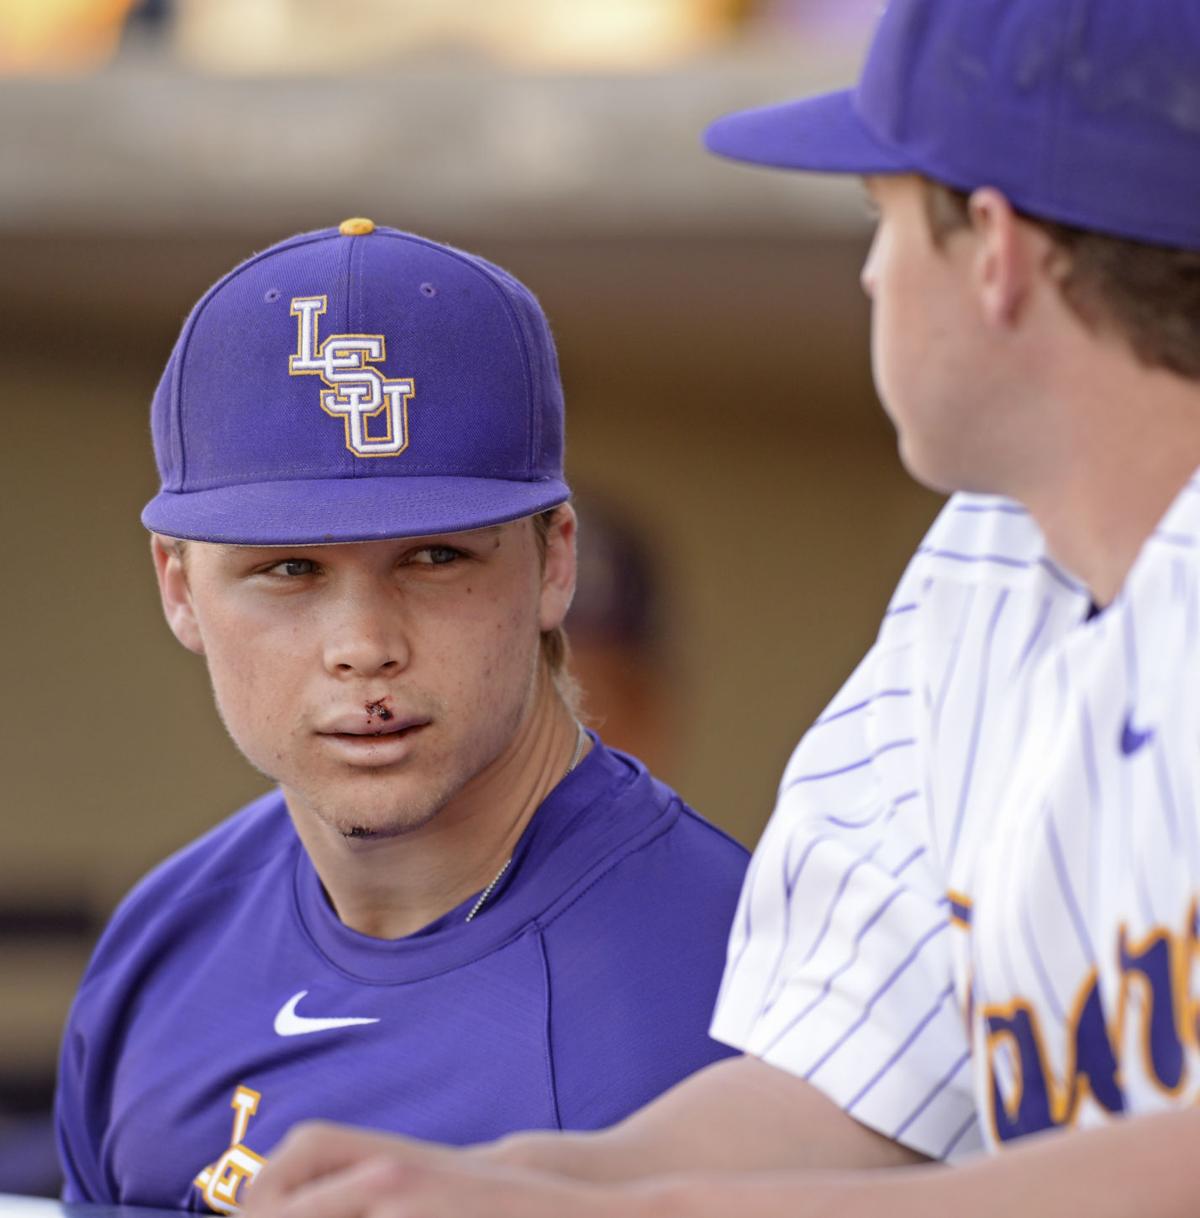 LSU baseball freshman Nick Webre ruled out for Tulane after scary crash